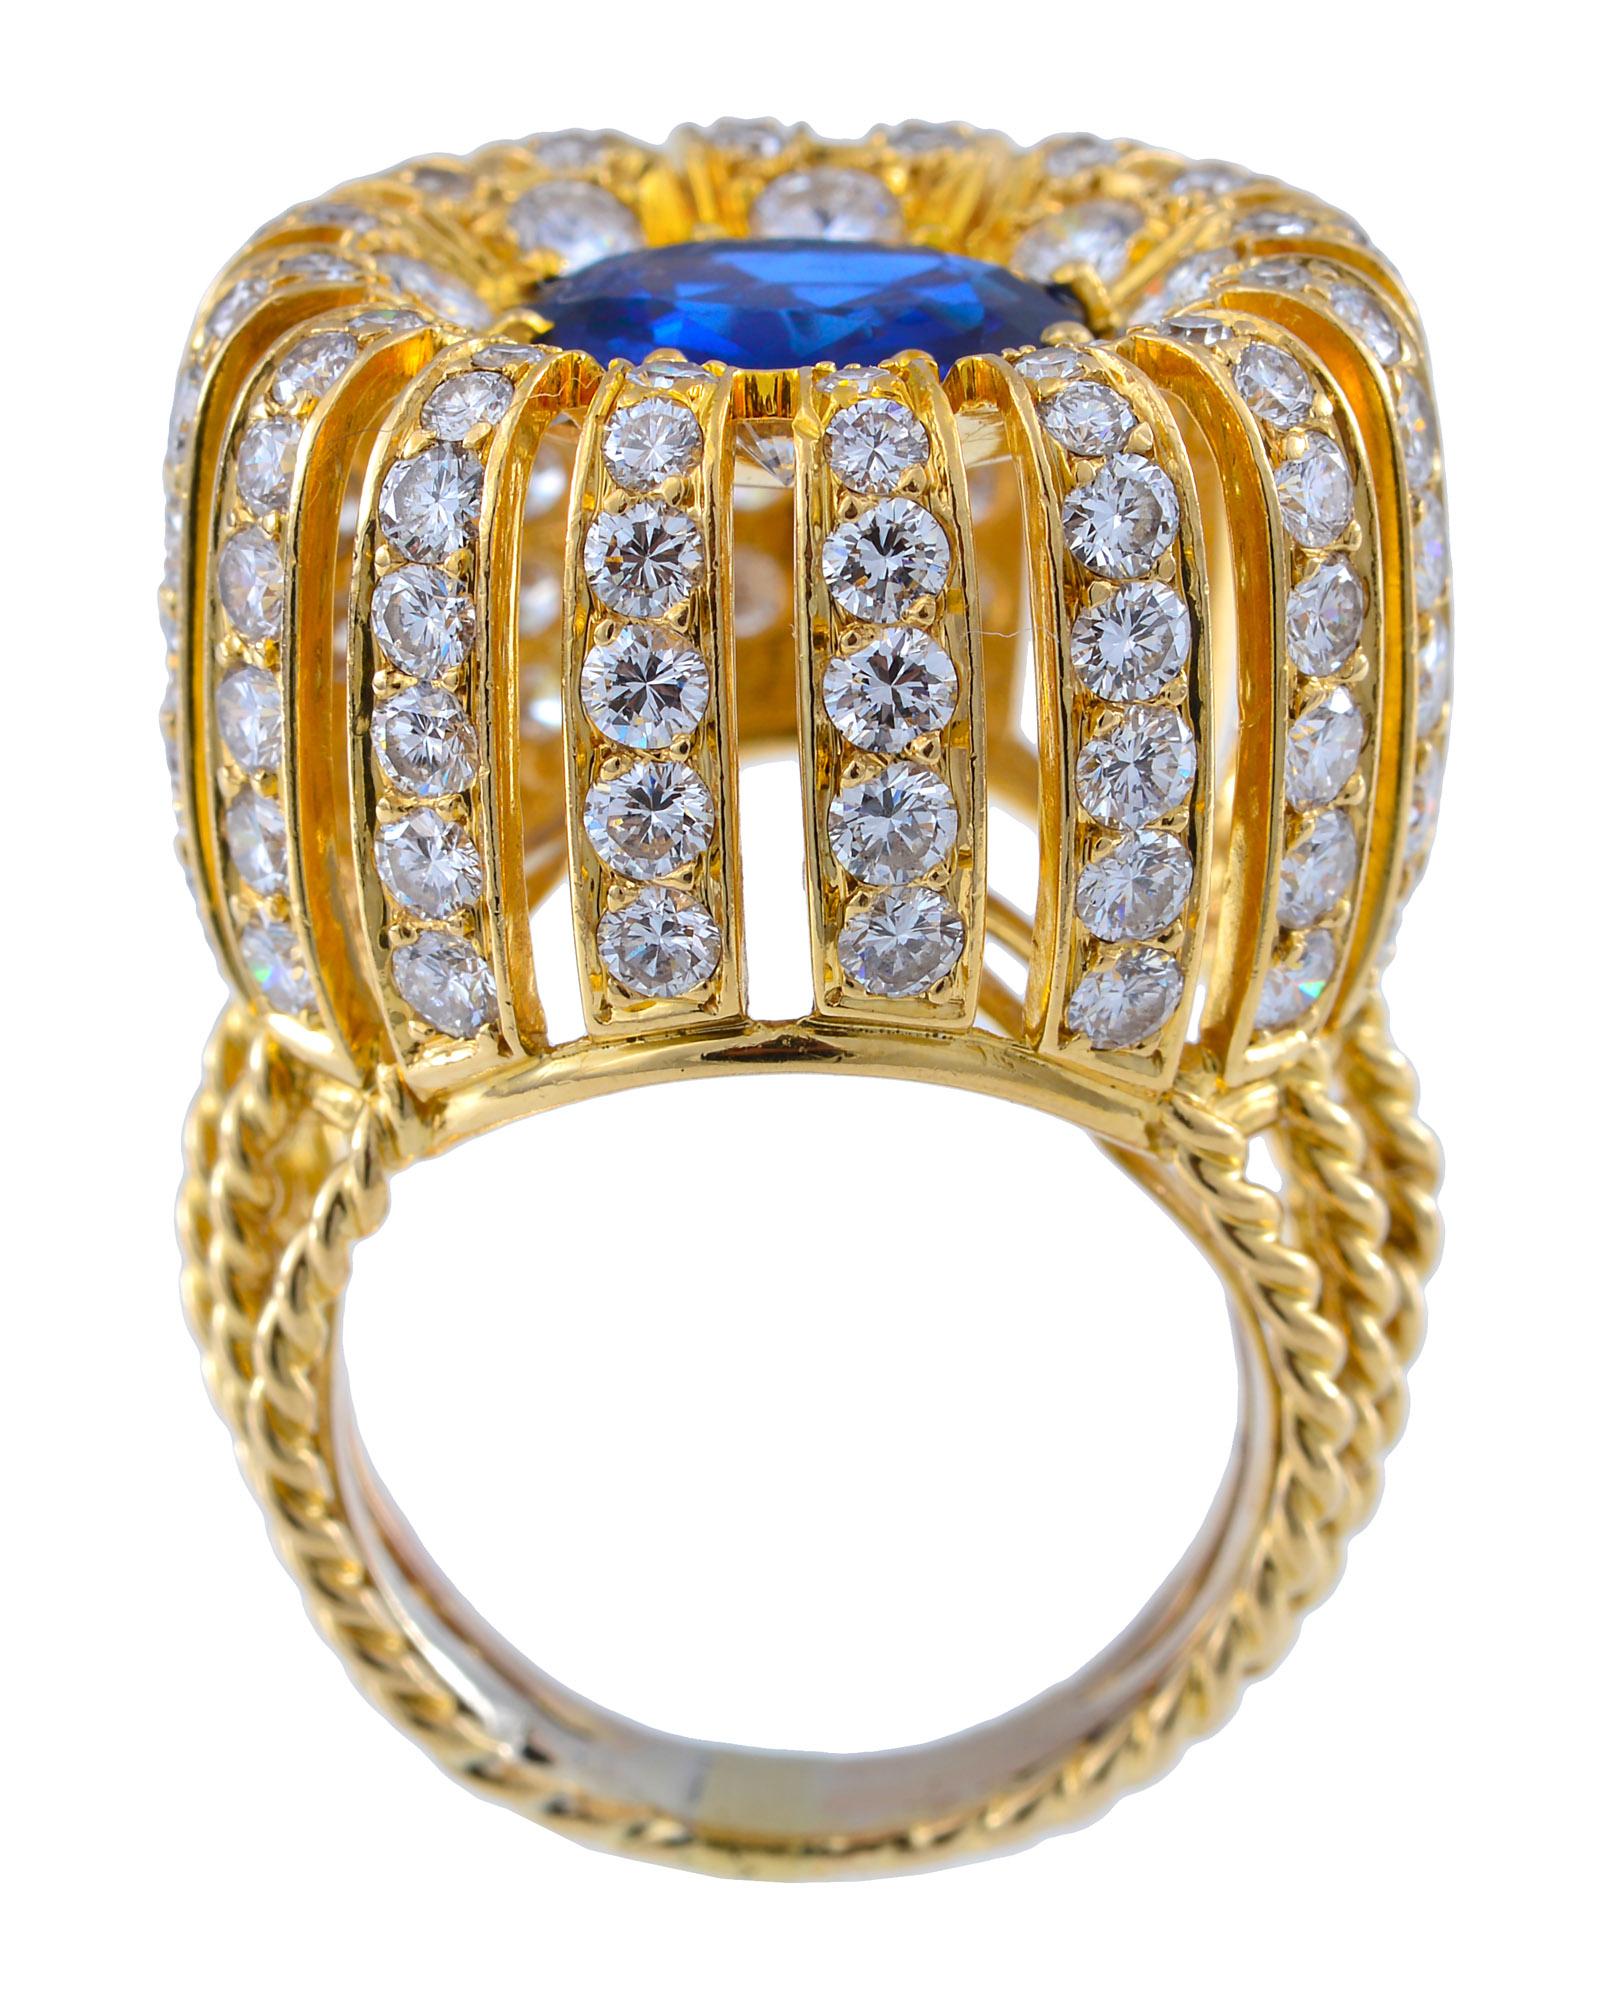 Retro Early 1950s Yellow Gold, Diamond and Sapphire Ring For Sale